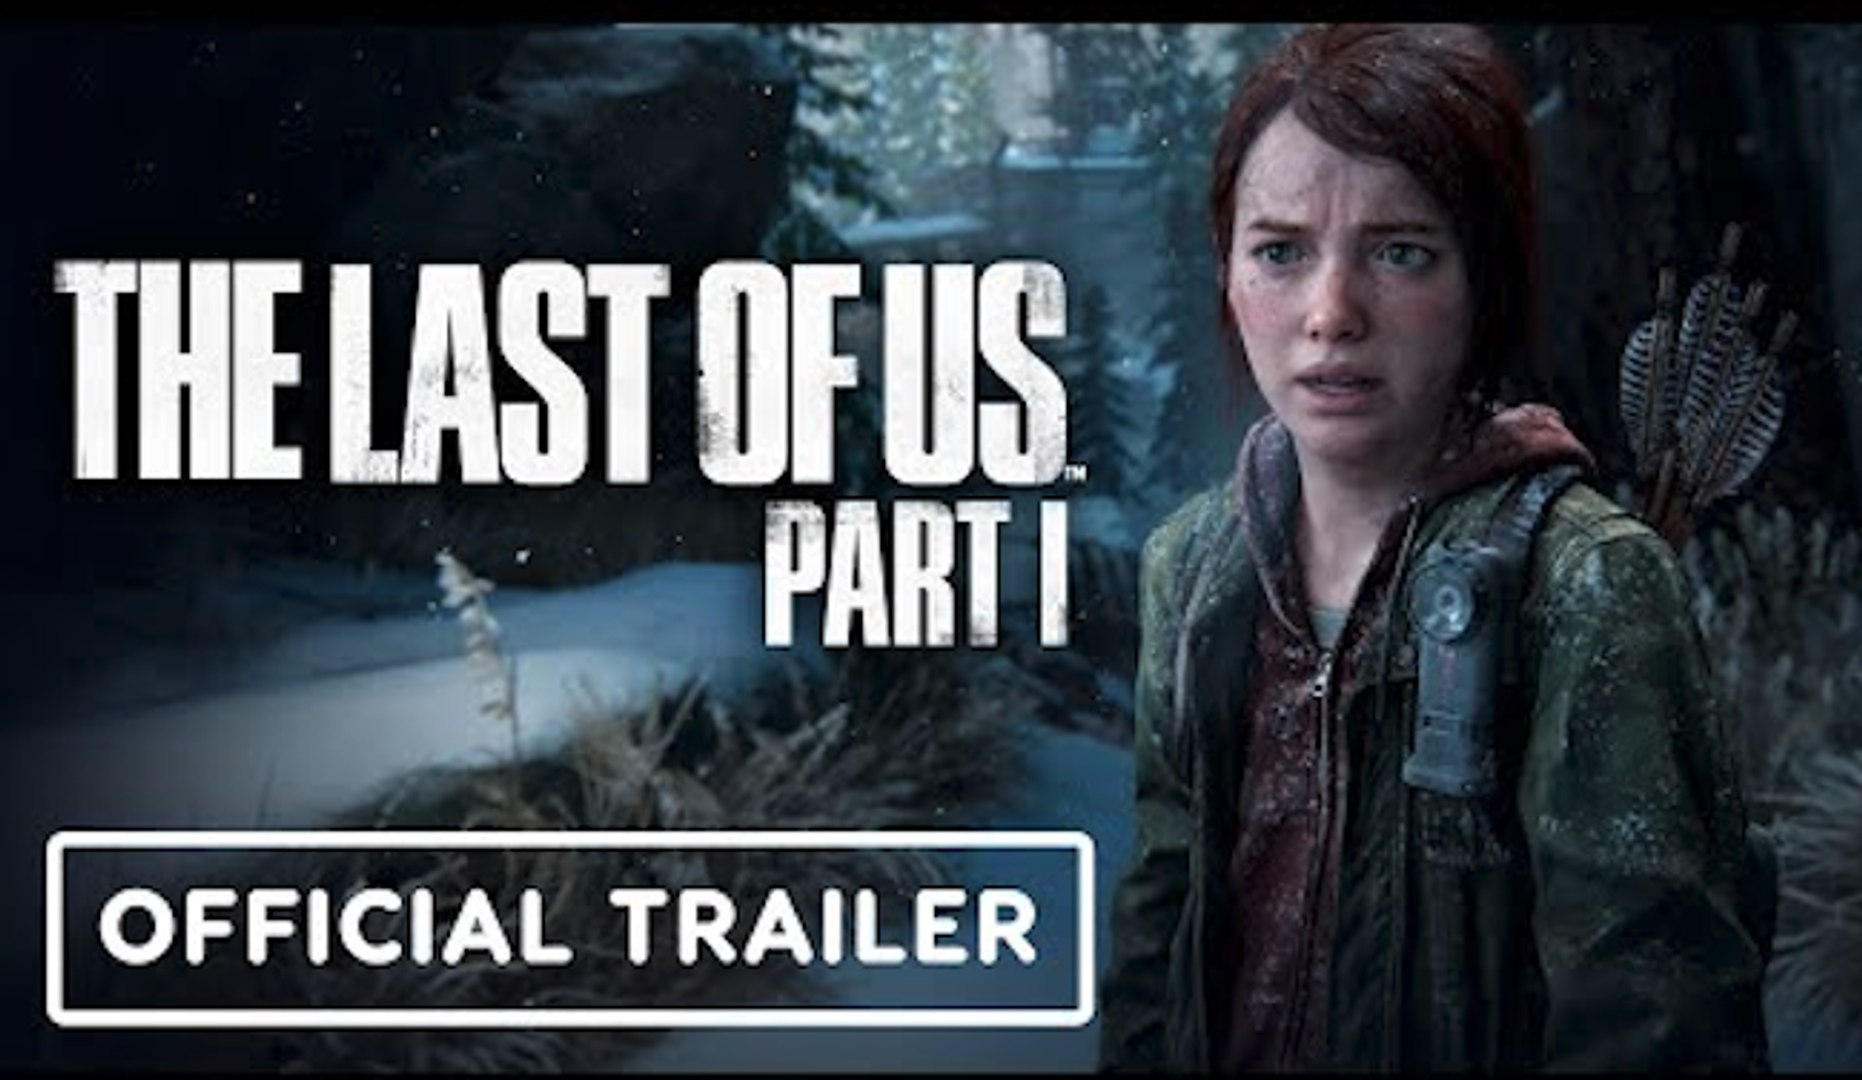 The Last of Us, Final Trailer